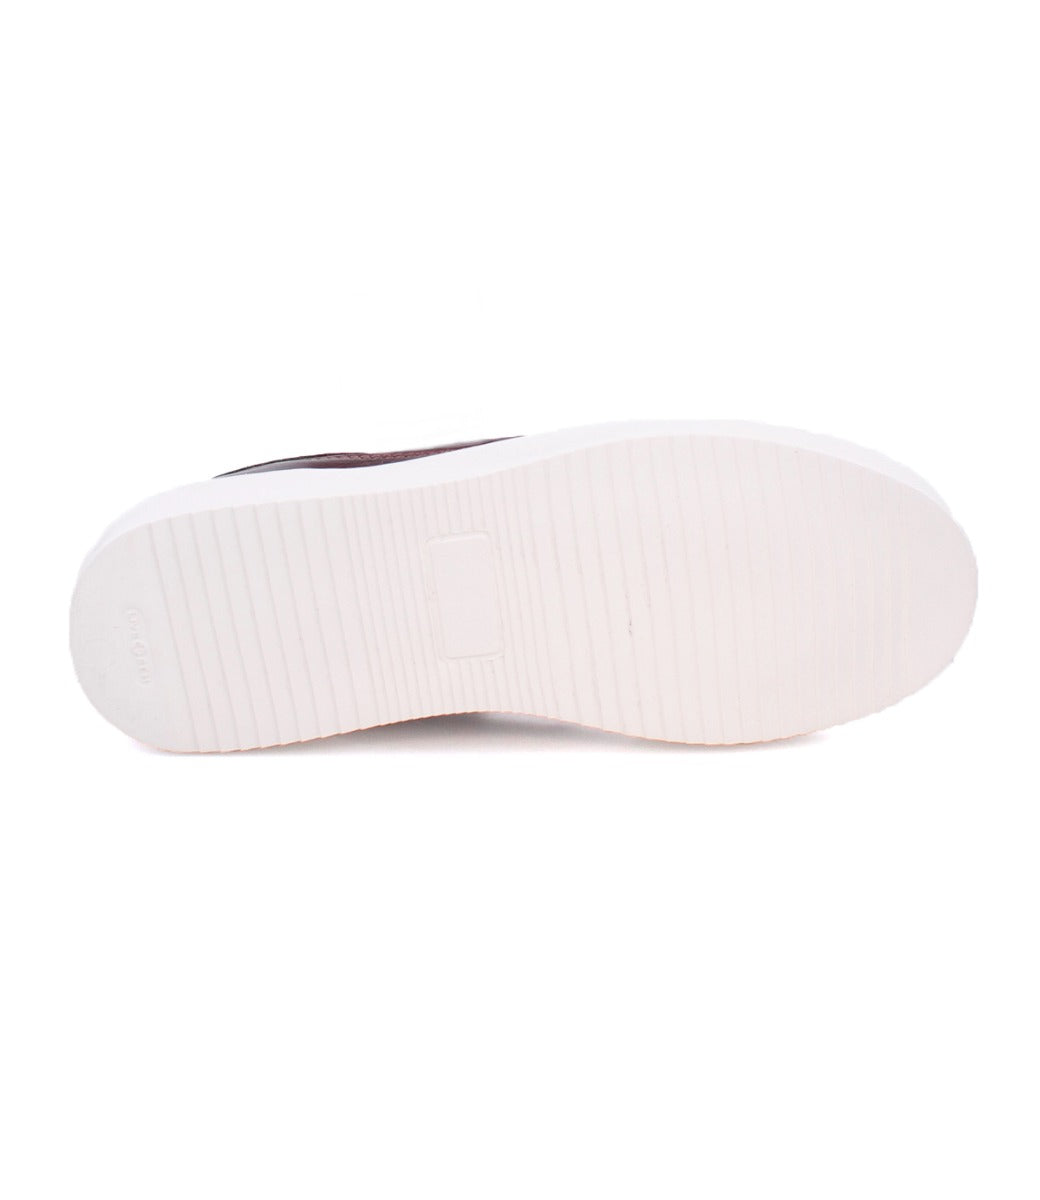 A pair of Azeli sneakers with white soles on a white background. (Brand: Bed Stu)